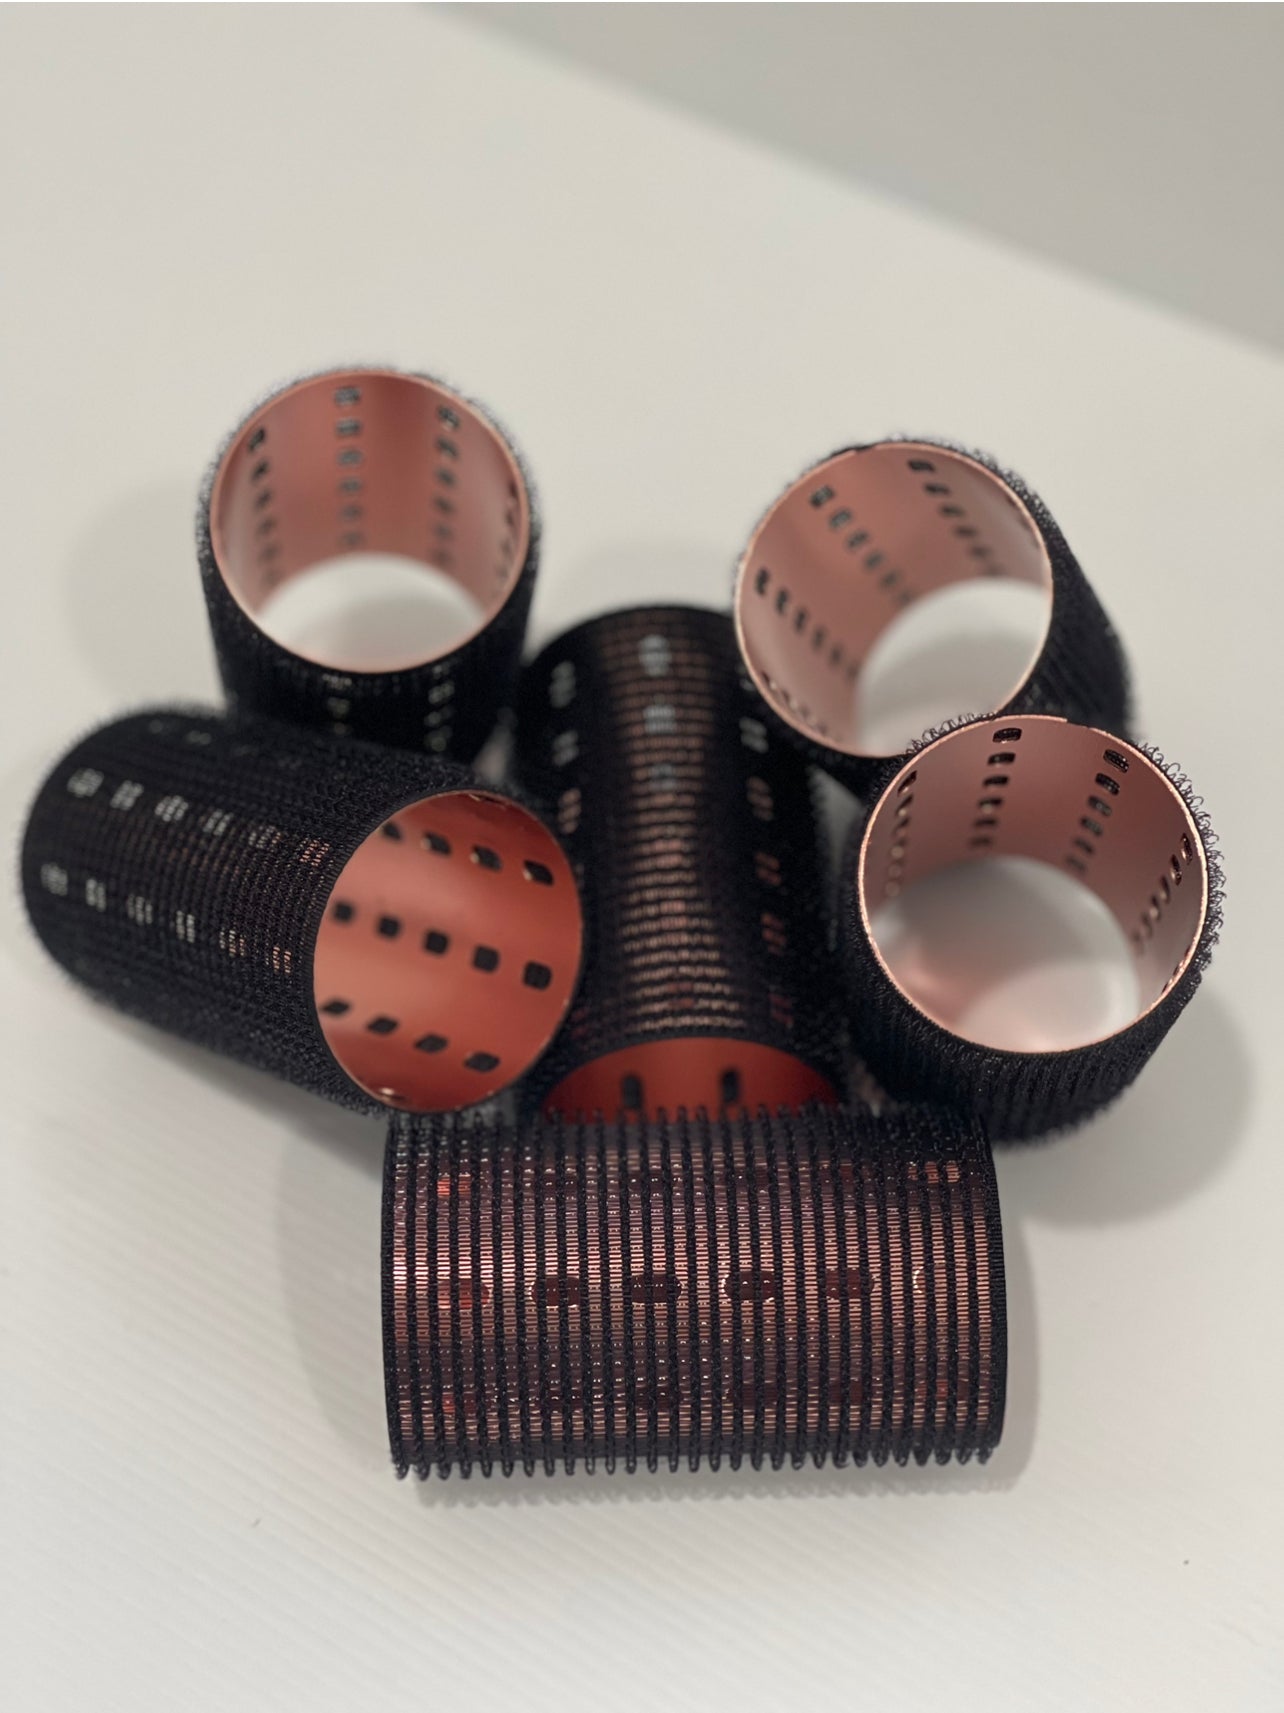 Extra wide professional Velcro hair rollers with Aluminium core and Self Grip Velcro 90mm wide to fit more hair per roller - Black velcro and Rose Gold aluminum core. This is a Mixed Set which includes 4 large rollers and 2 smaller sizes, this set of 6 Velcro Rollers by Phoenix Nationale. Wholesale pricing available please contact us.